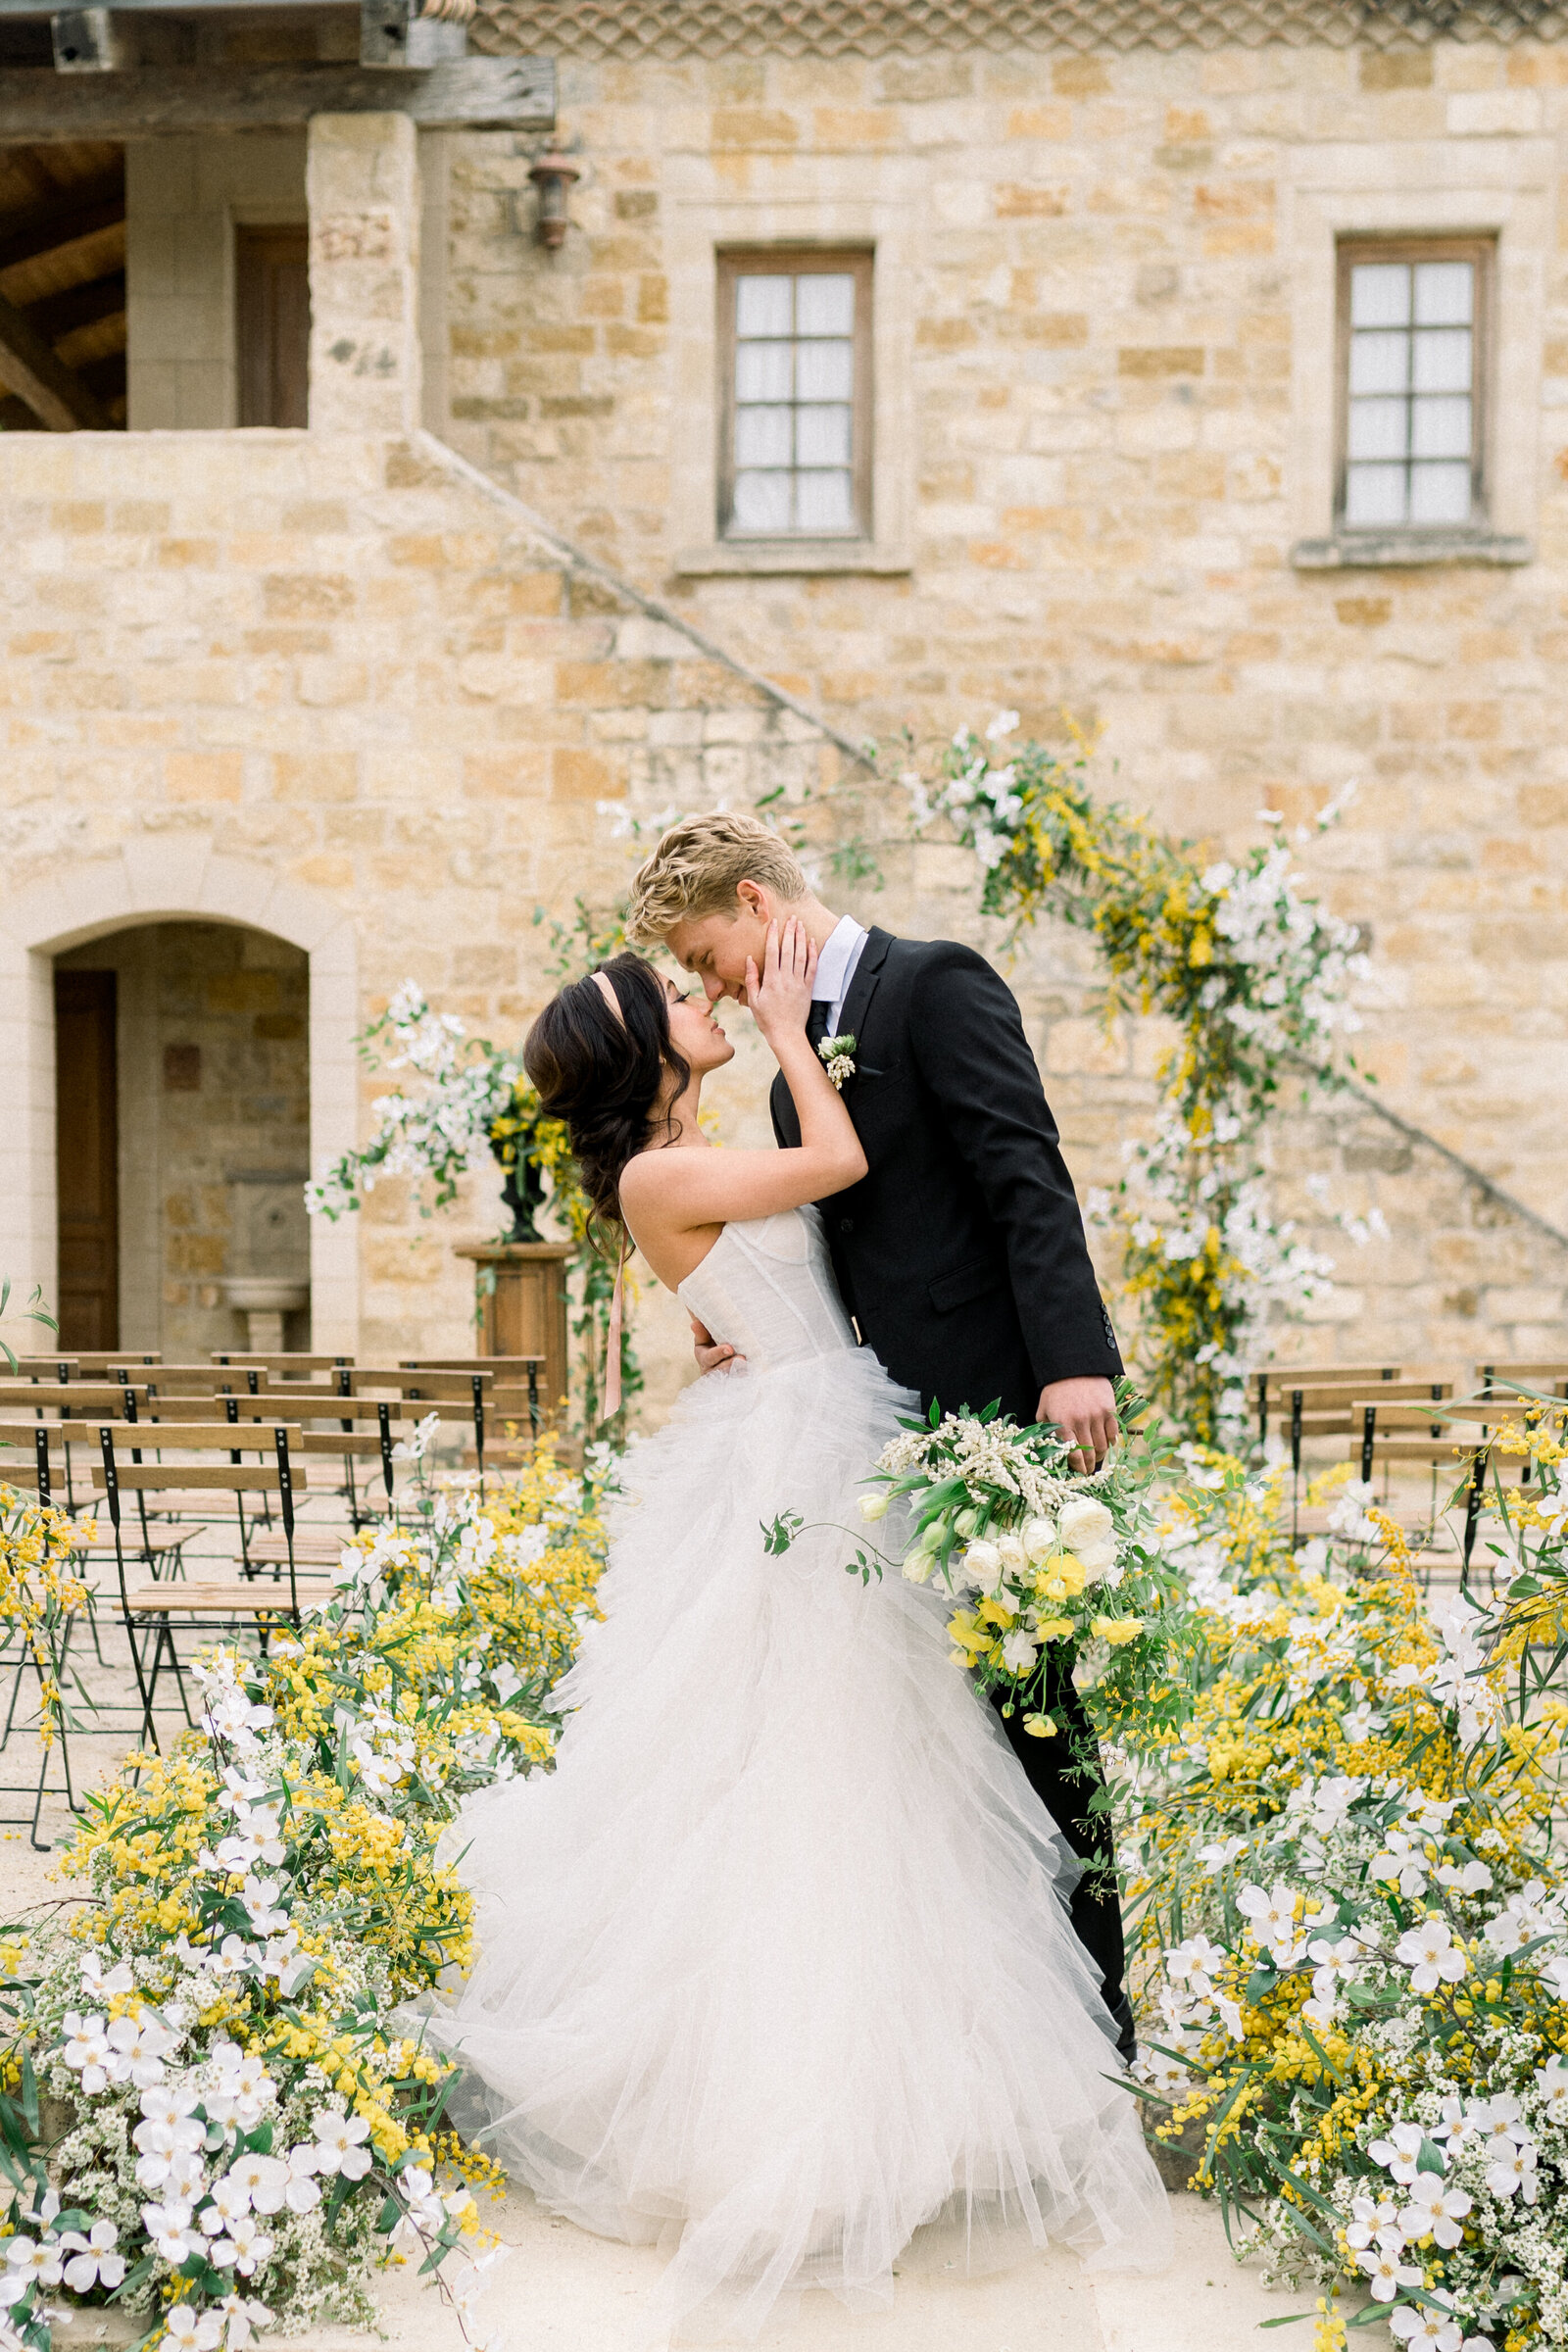 Bride and groom kiss down the aisle at their Sunstone Winery wedding in Santa Ynez, CA